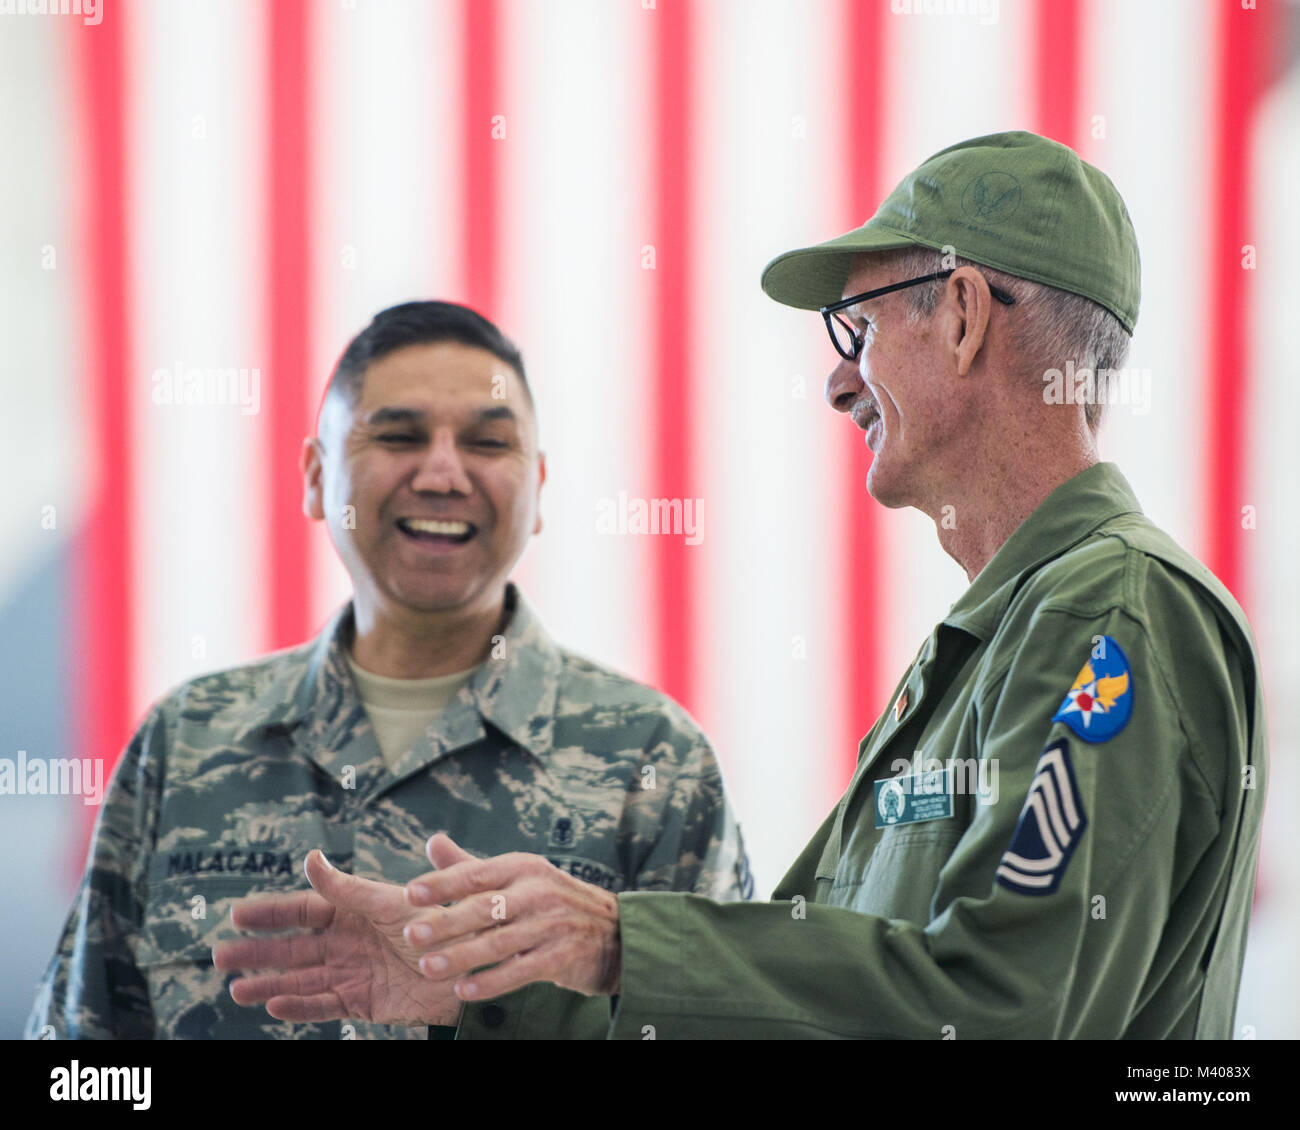 Jeff Intemann, a Vietnam Veteran from Vacaville, Calif., speaks with U.S. Air Force Chief Master Sgt. Marcos Malacara of the 60th Diagnostics and Therapeutics Squadron during the 75th Anniversary kickoff celebration at Travis Air Force Base, Calif., Feb. 8, 2018. The celebration featured the inaugural unveiling of the 75th Anniversary logo on a C-17 Globemaster III. Travis is celebrating 75 years as a major strategic logistics hub for the Pacific and integral part of global power projection for the total force. (U.S. Air Force photo by Louis Briscese) Stock Photo